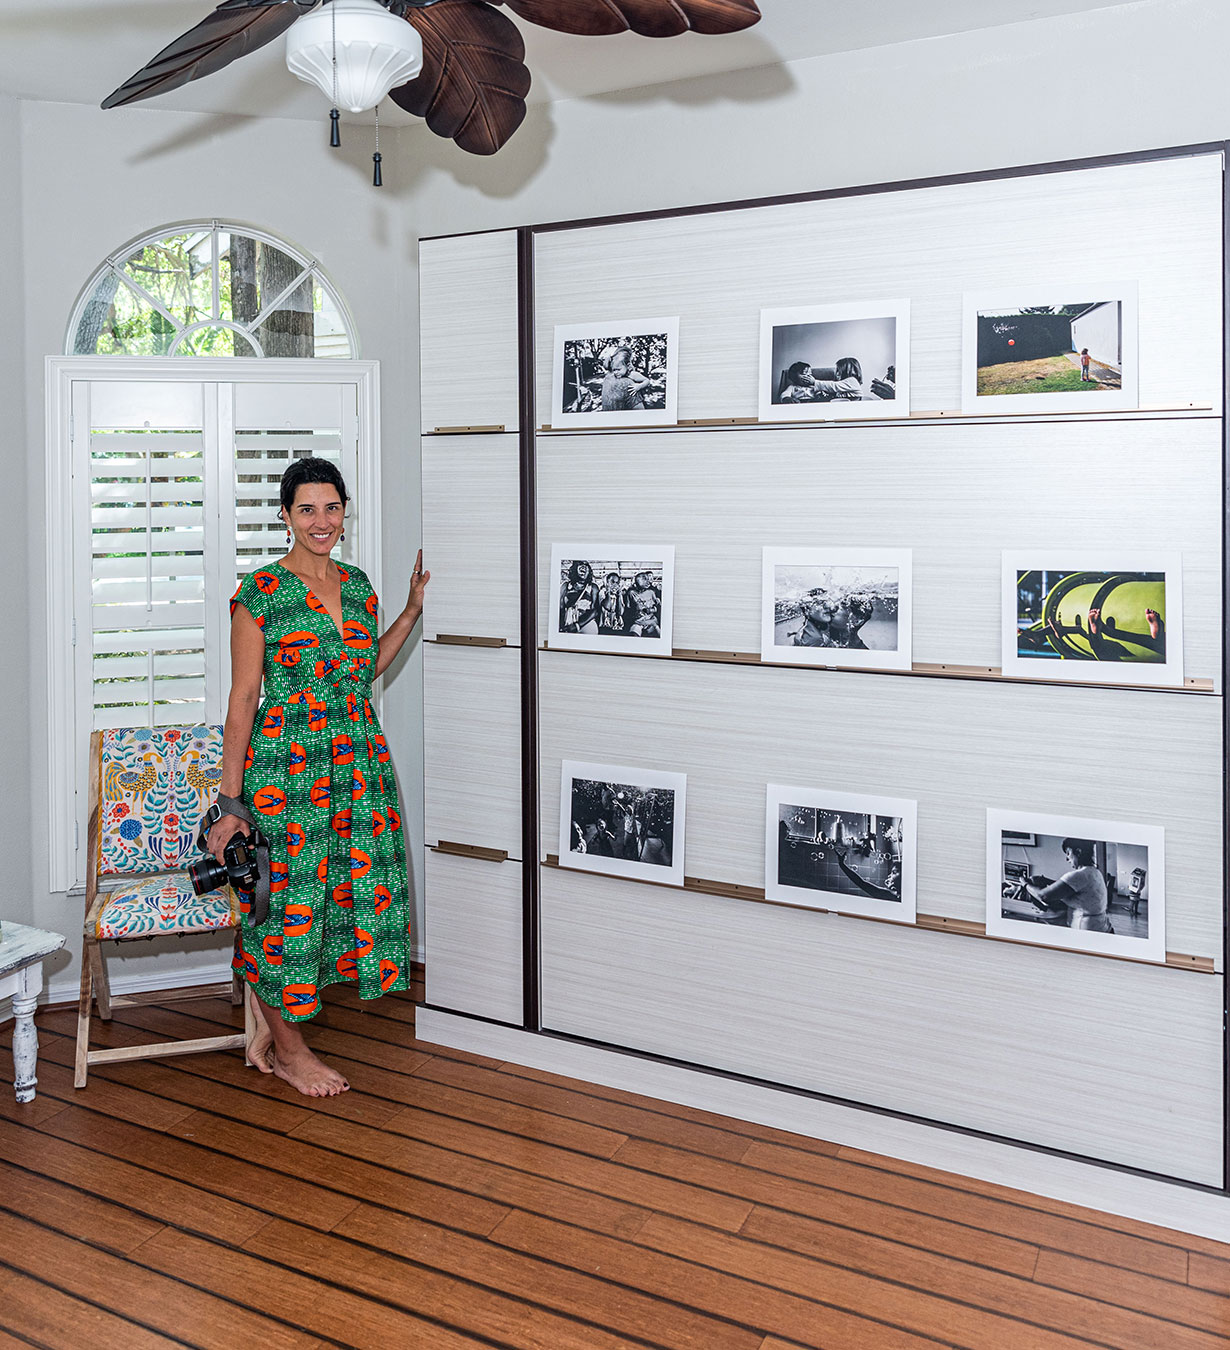 Aguenda stands by her new wall bed with the front displaying photos